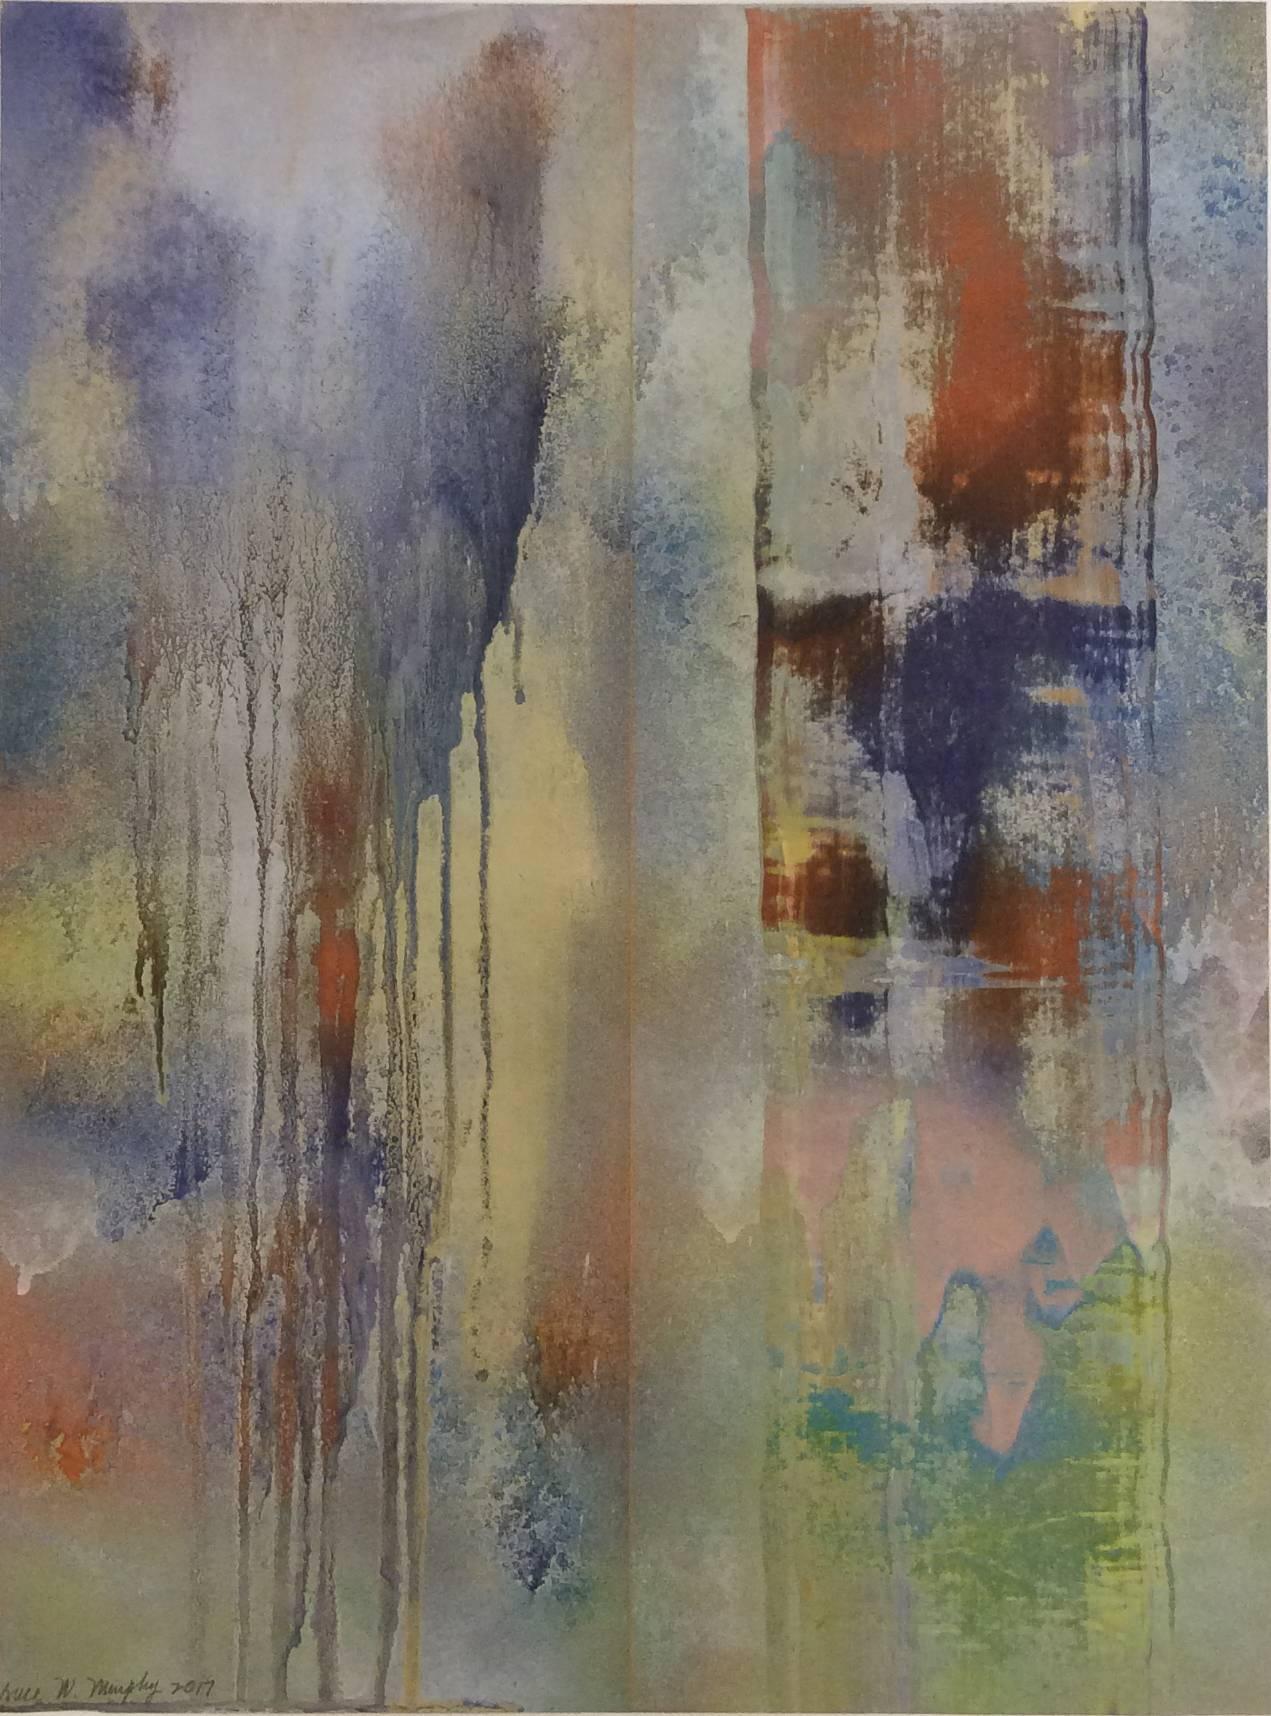 Blue Veils (Pair of Abstract Paintings on Paper, Blue & Orange Metallic Powder) by Bruce Murphy
enamel paint and metallic powders on Arches paper
each piece measures 24 x 18 inches
overall dimensions are 24 x 36 inches
Intended to be hung as a pair,